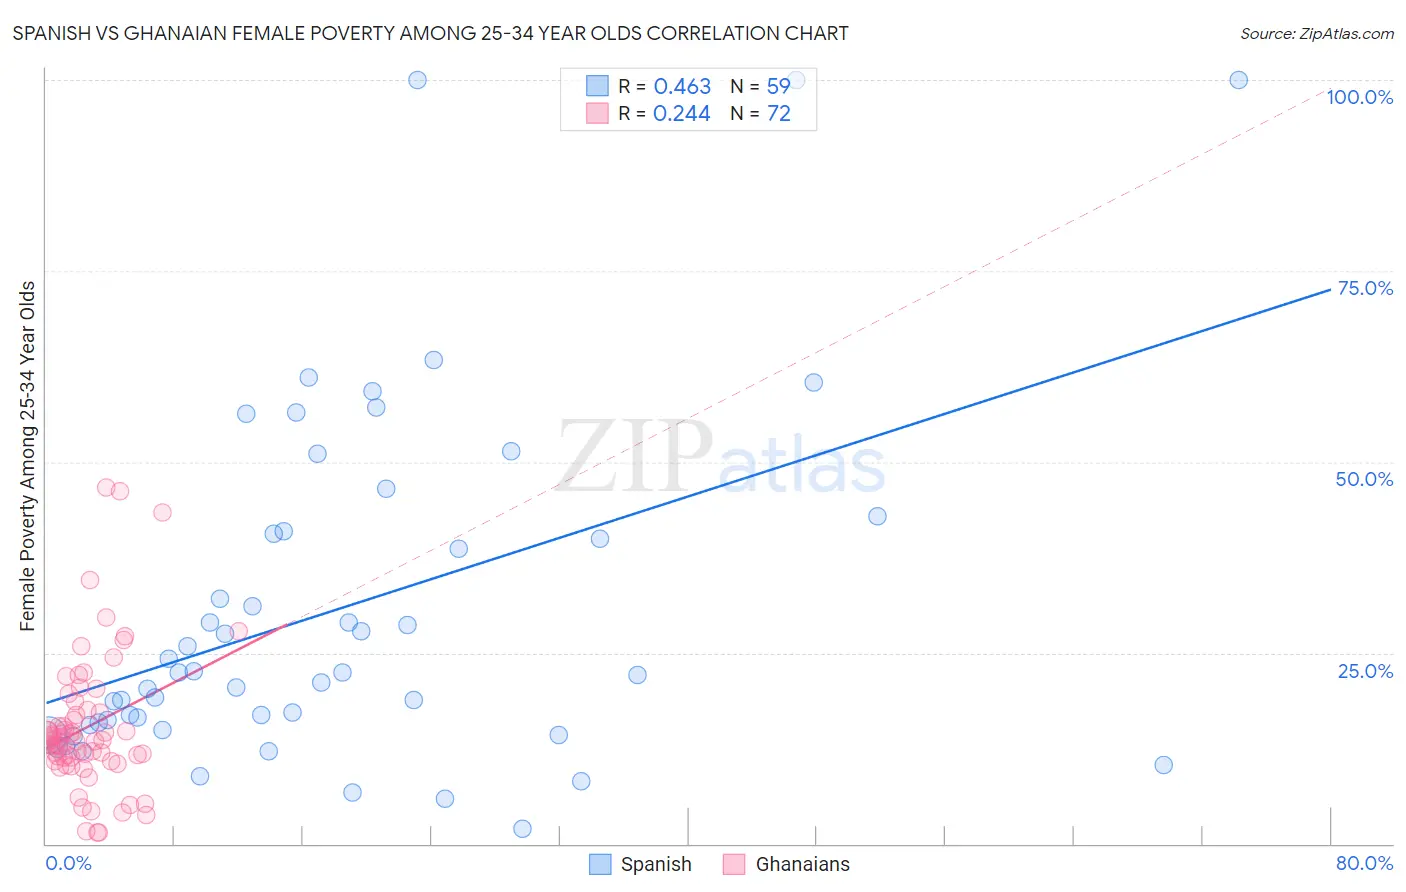 Spanish vs Ghanaian Female Poverty Among 25-34 Year Olds